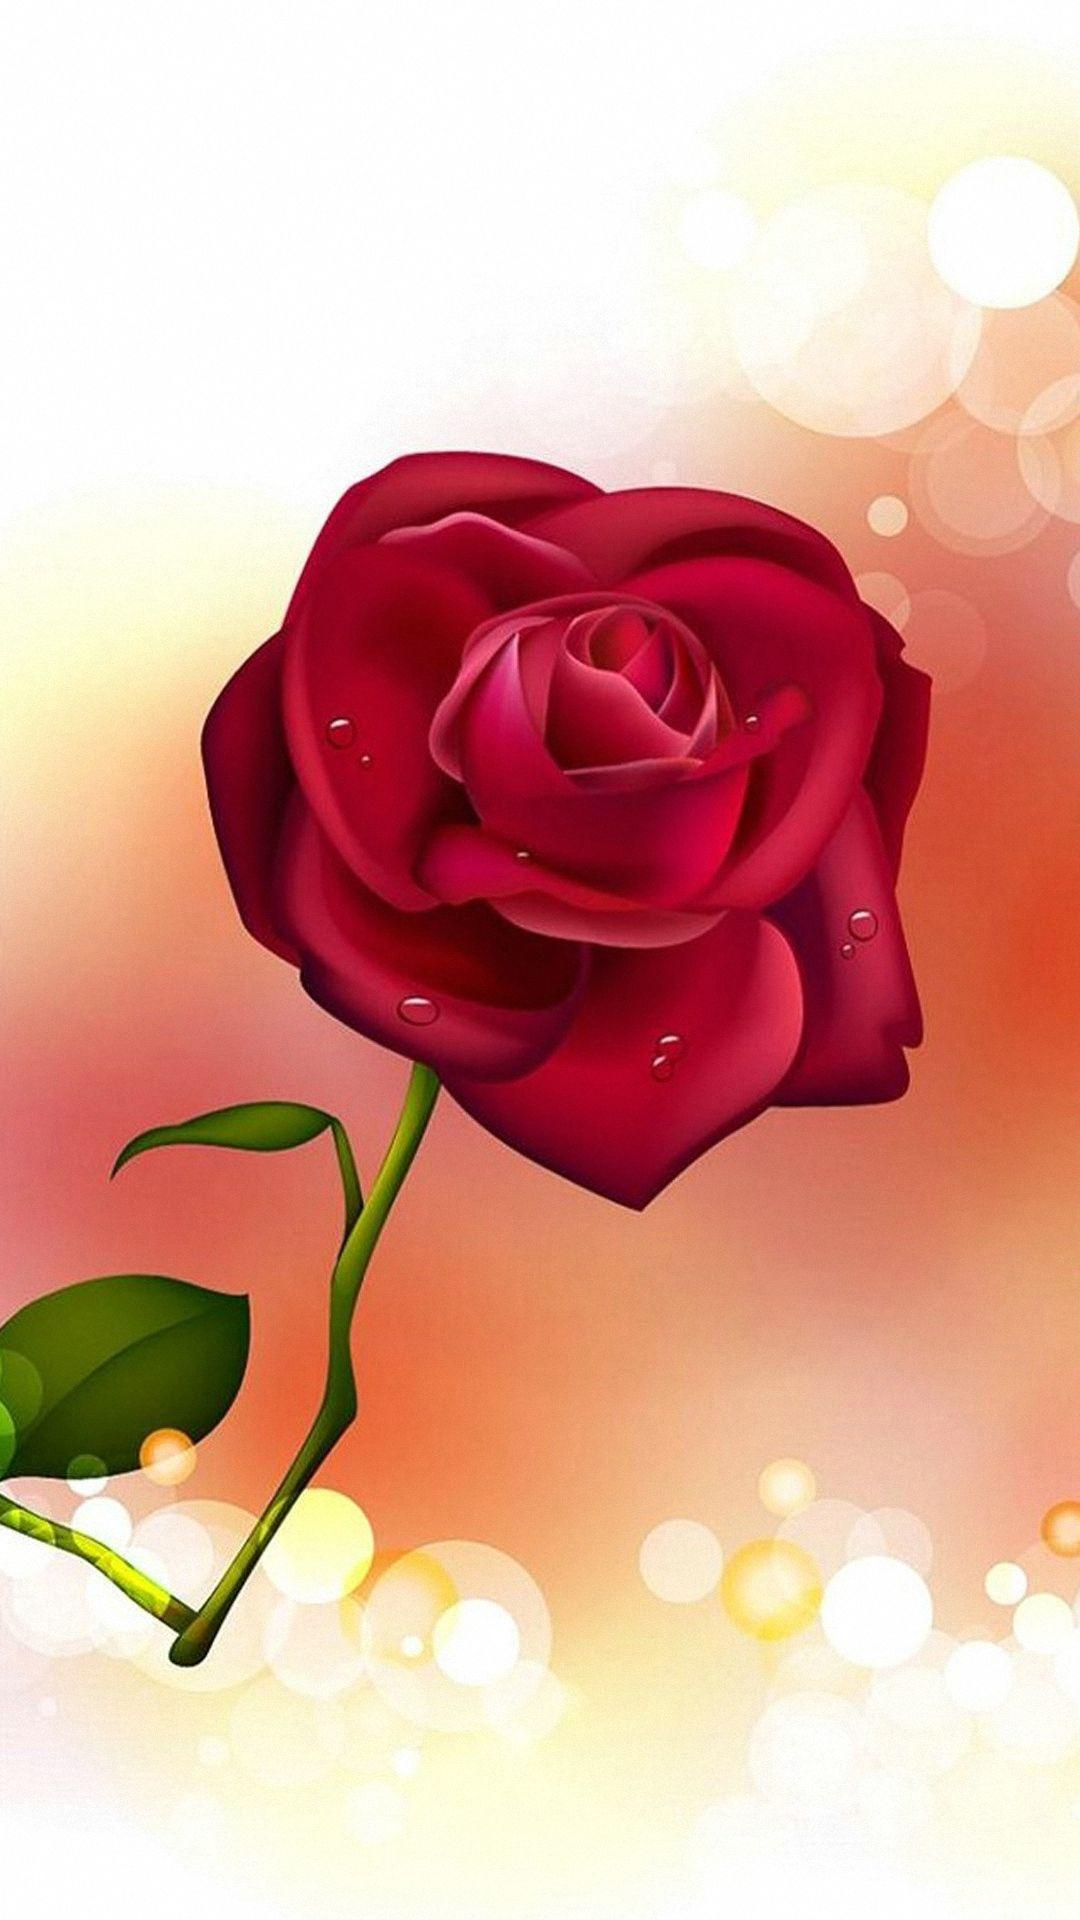 Download rose Wallpaper by georgekev  04  Free on ZEDGE now Browse  millions of popular blu  Hd flower wallpaper Red roses wallpaper Purple  flowers wallpaper